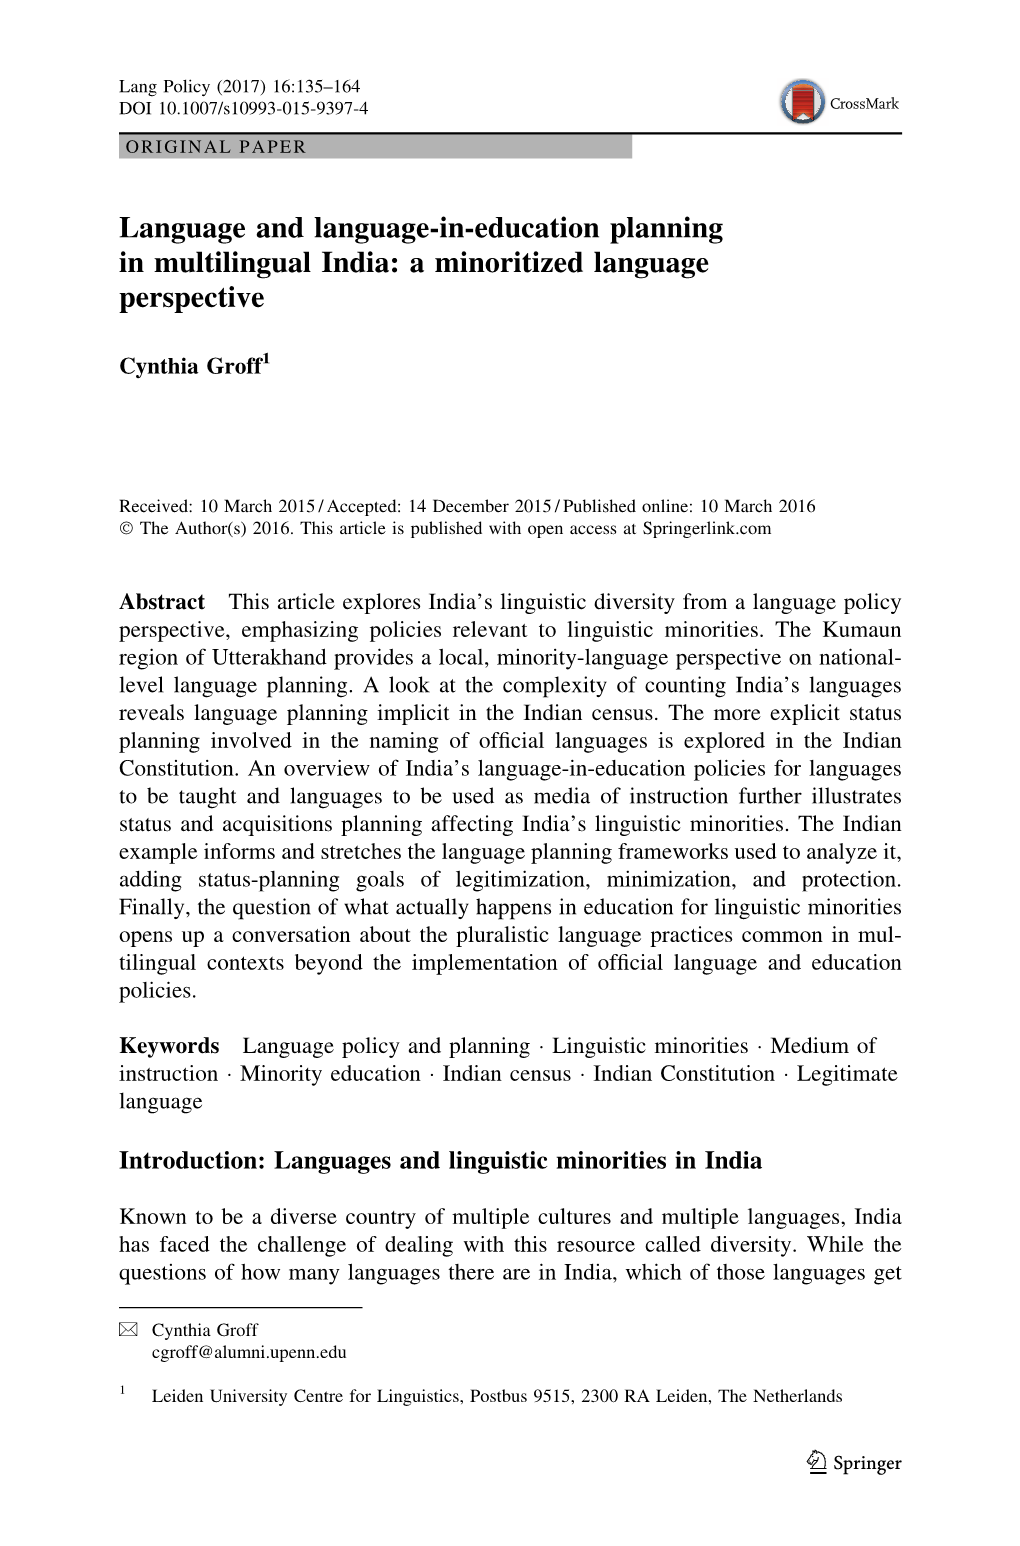 Language and Language-In-Education Planning in Multilingual India: a Minoritized Language Perspective